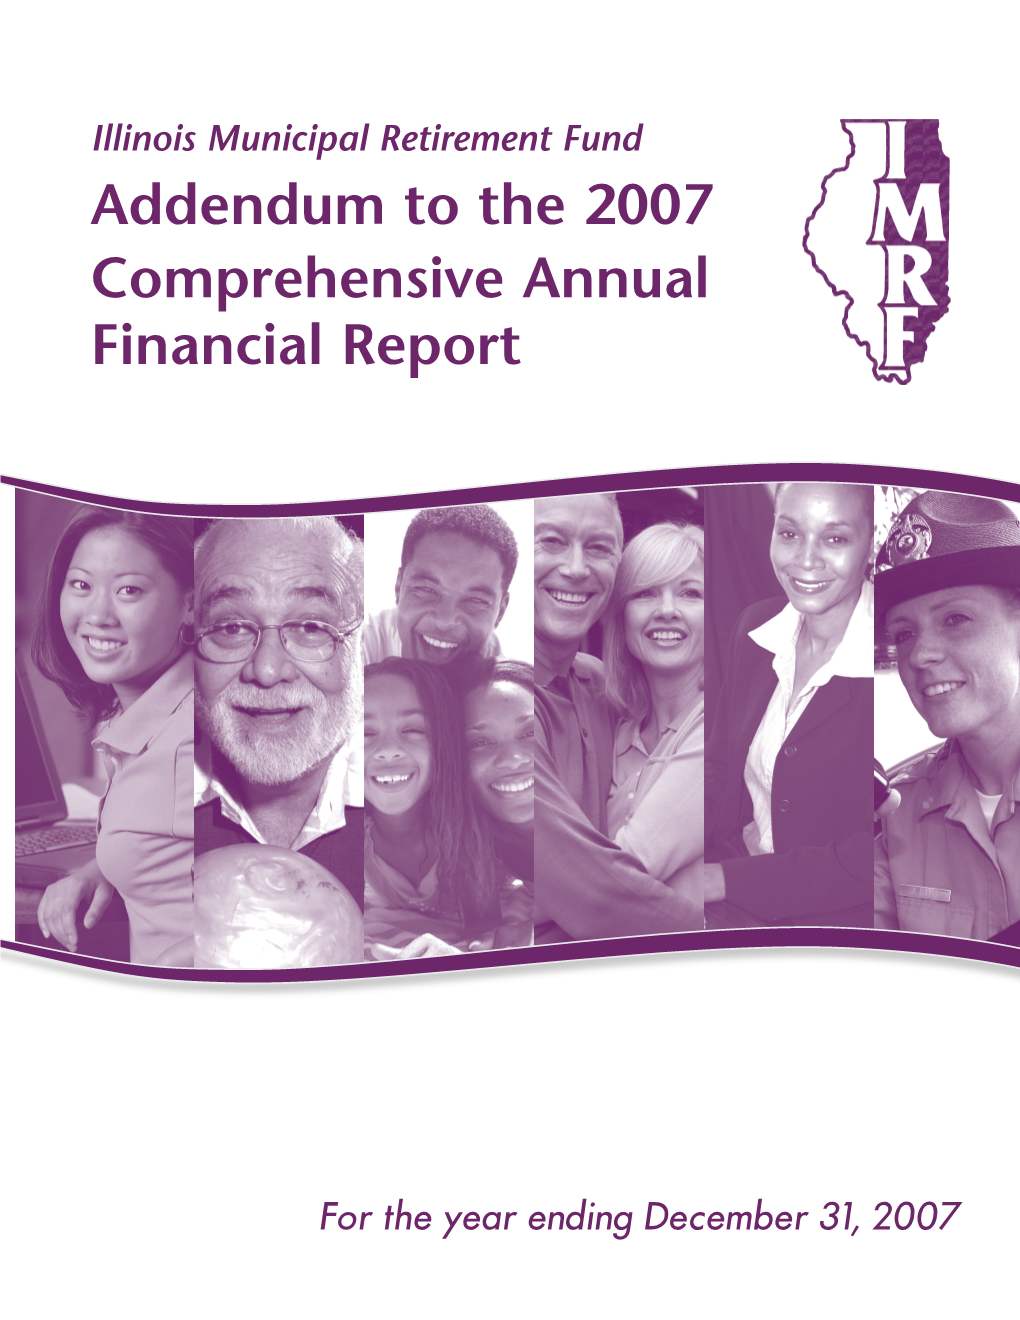 2007 IMRF Addendum to the Comprehensive Annual Financial